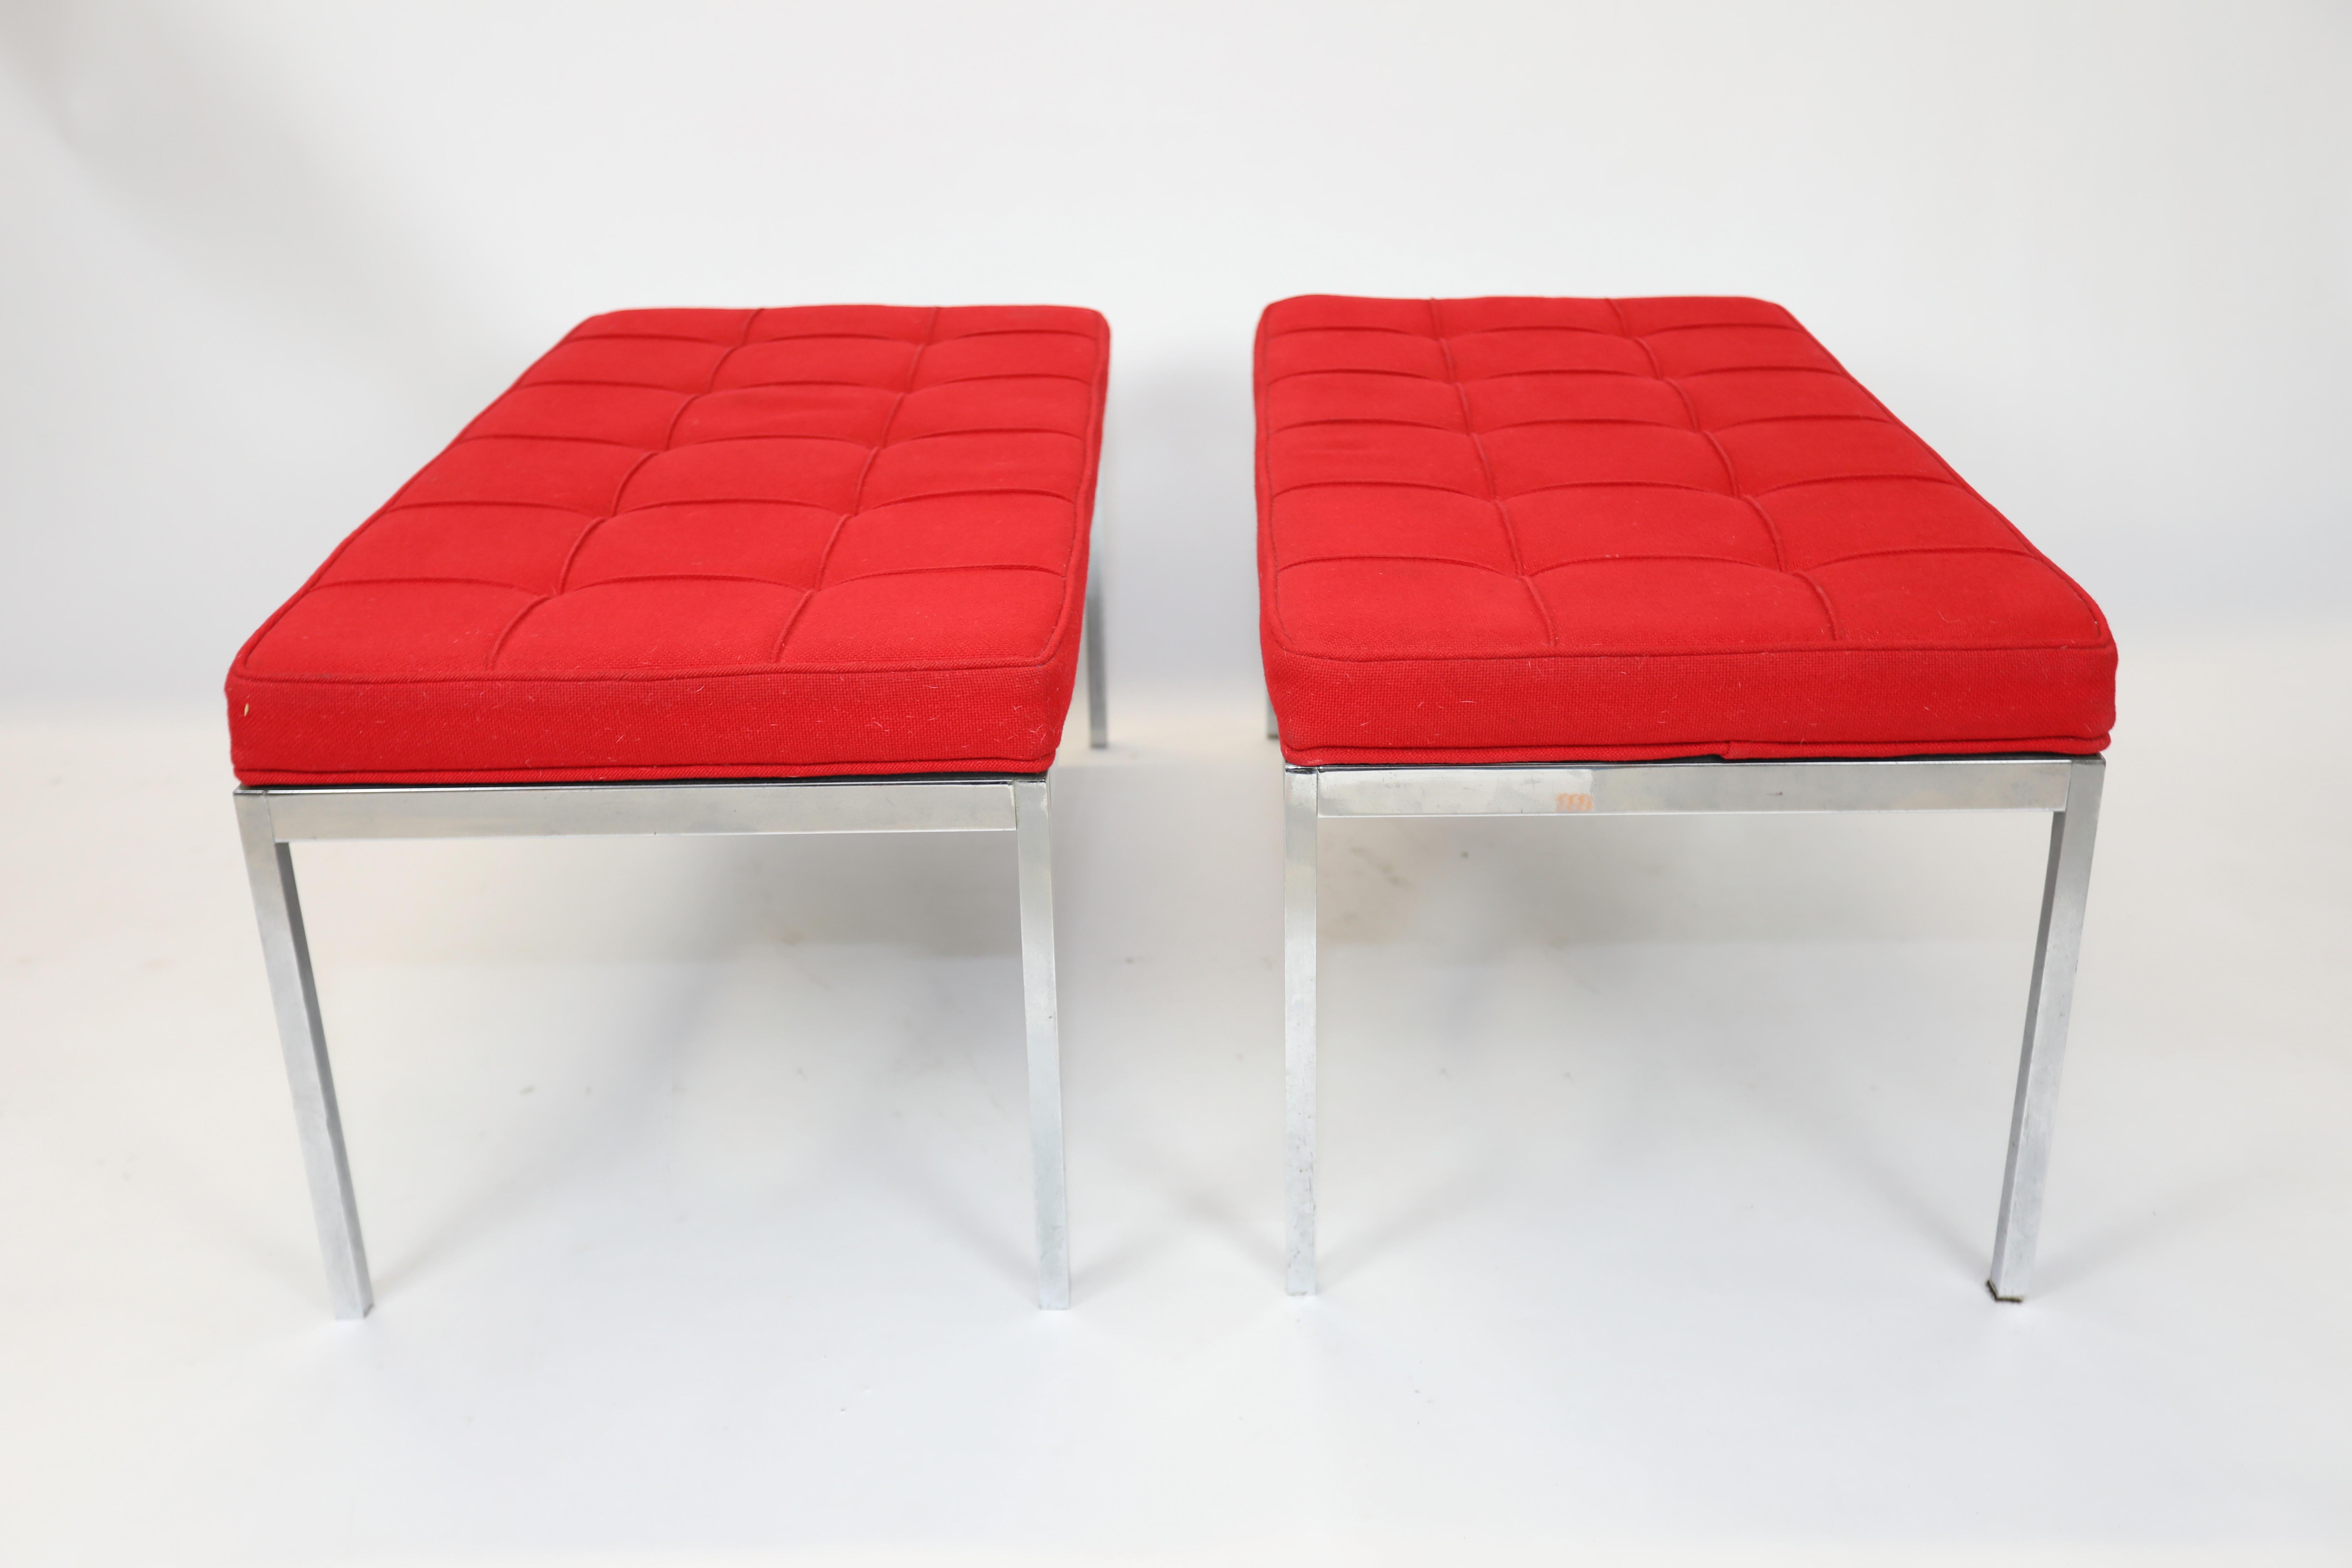 2 Florence Knoll benches
Original red upholstery.
Labeled
Sold individually, price is for 1 bench.